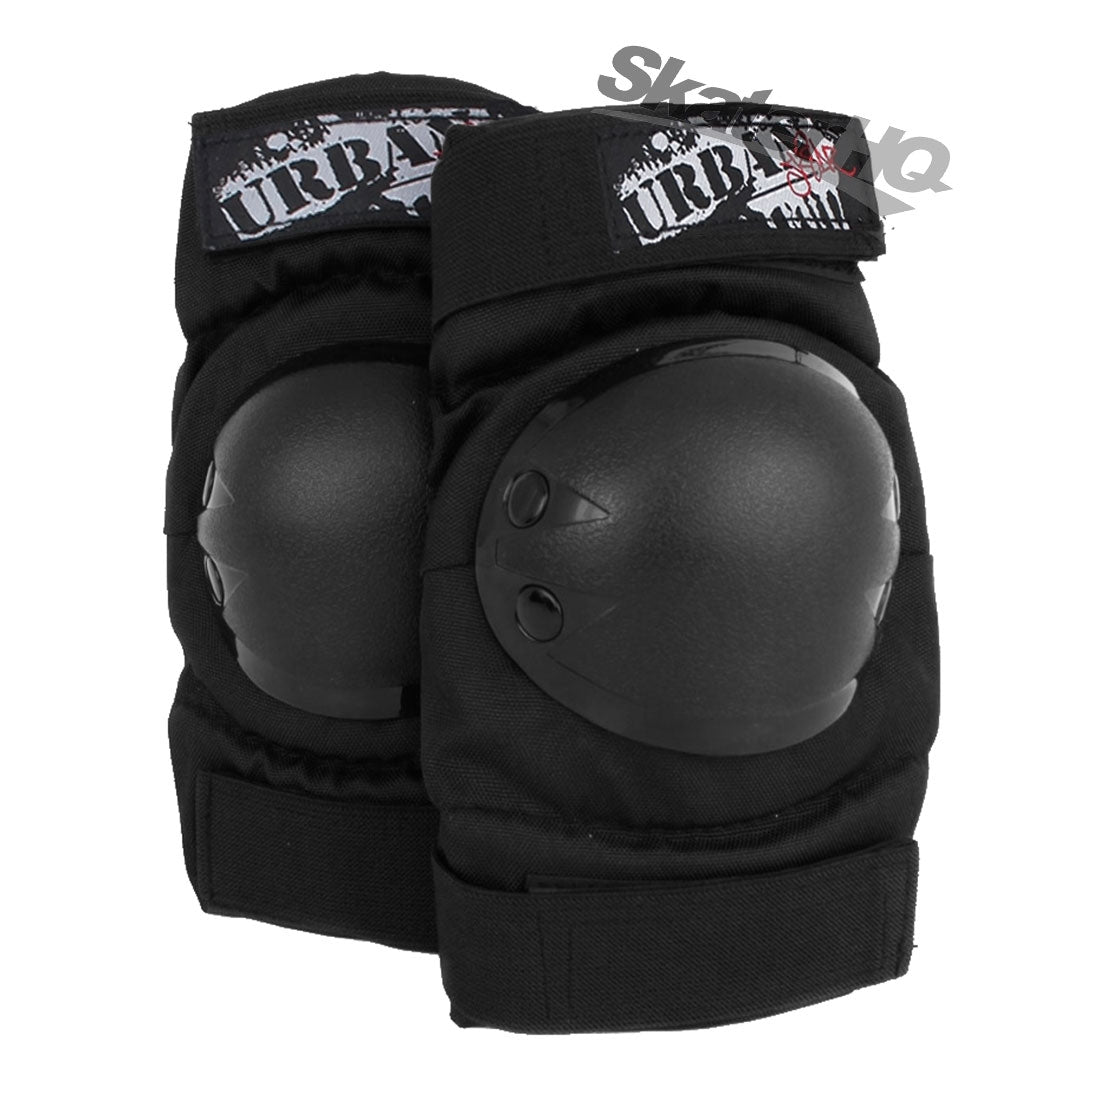 Urban Skater Elbow Pads - Large Protective Gear